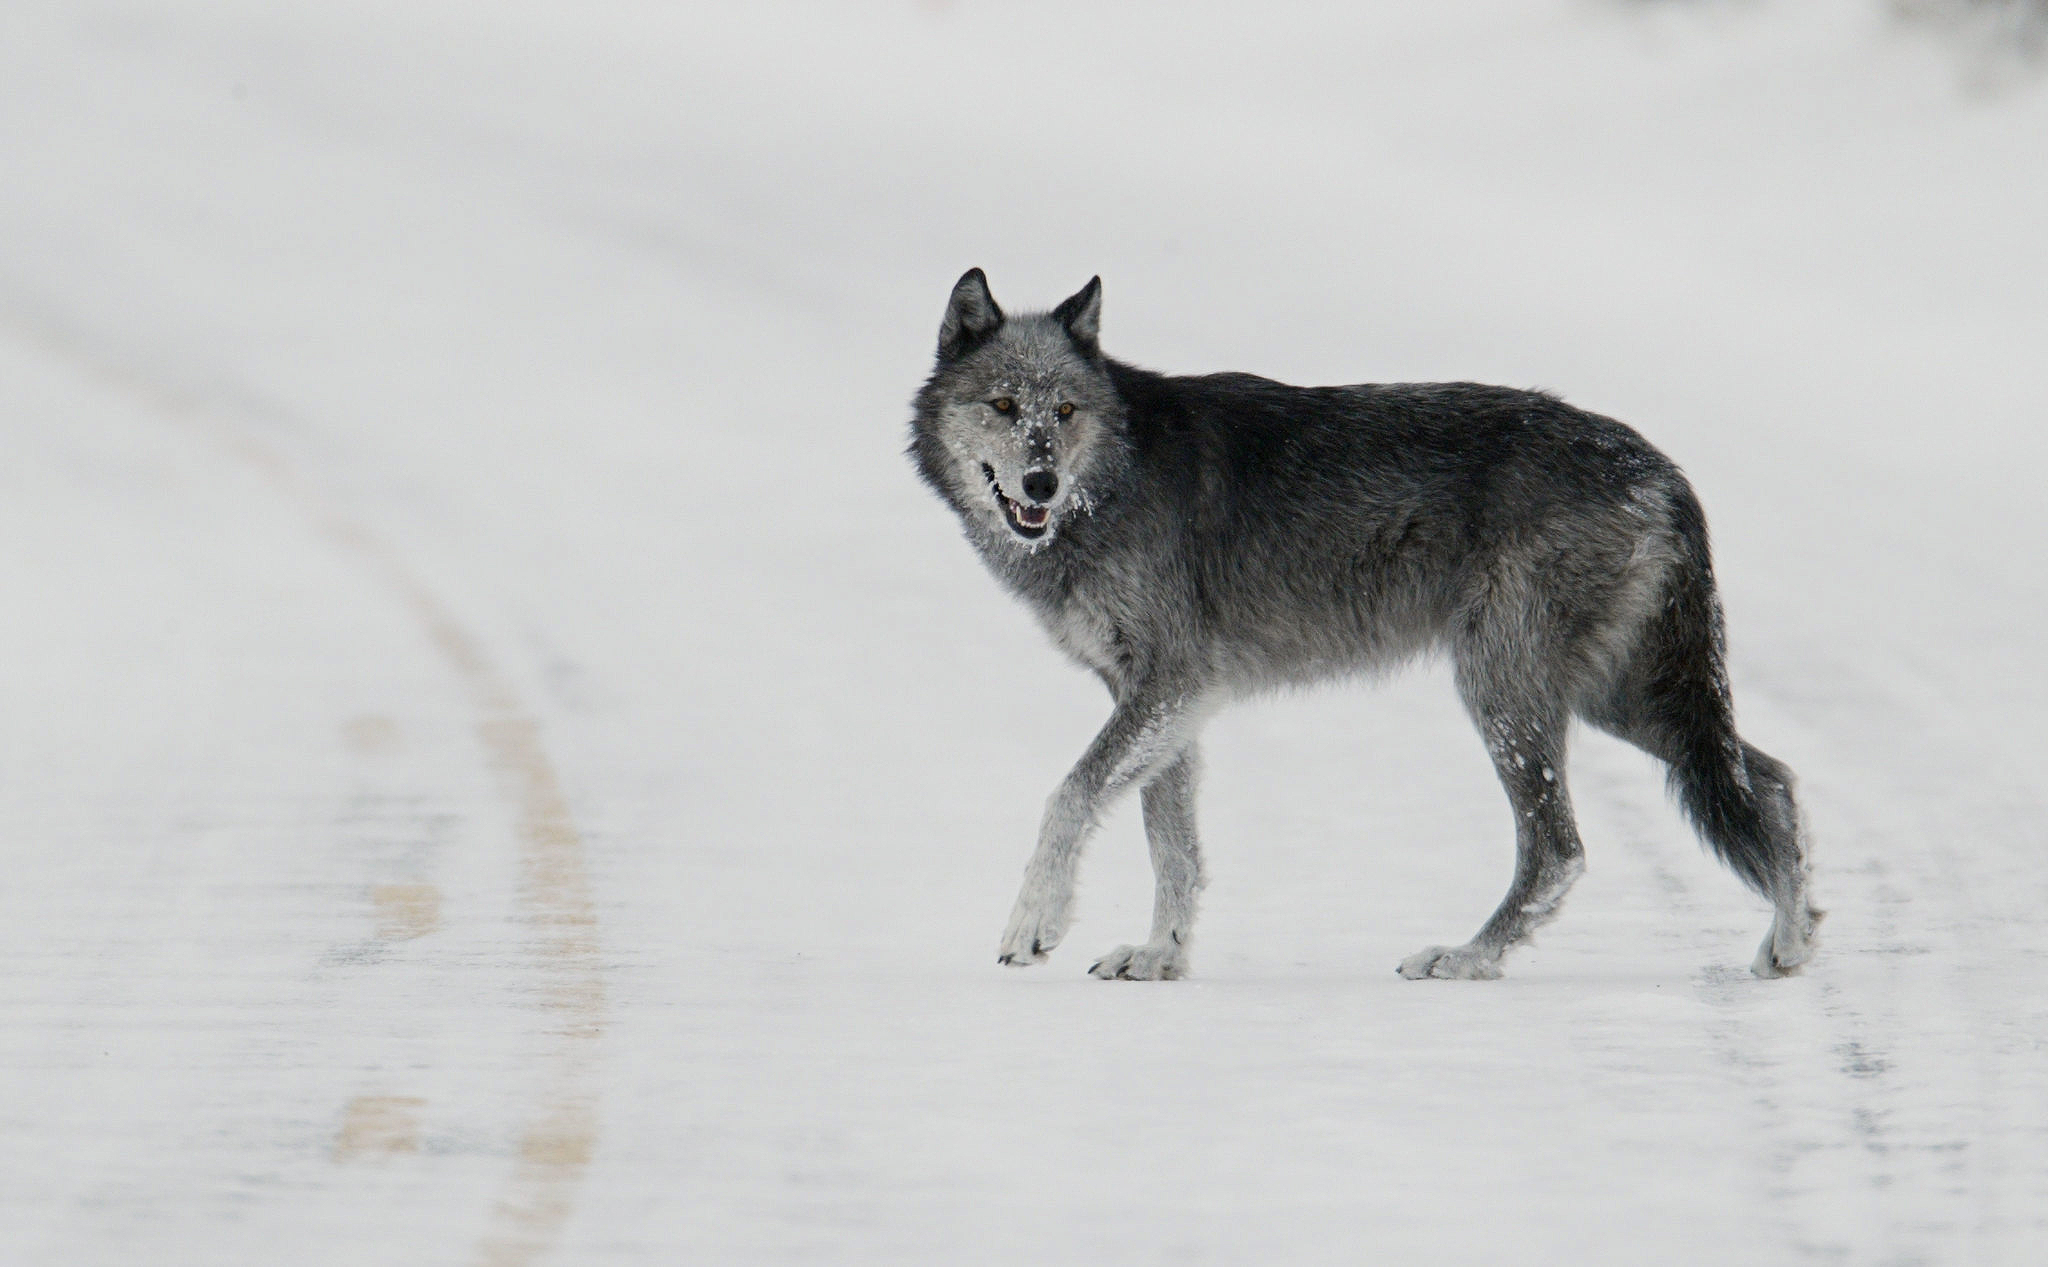 A dark gray and white Wyoming wolf crosses a snowy road.